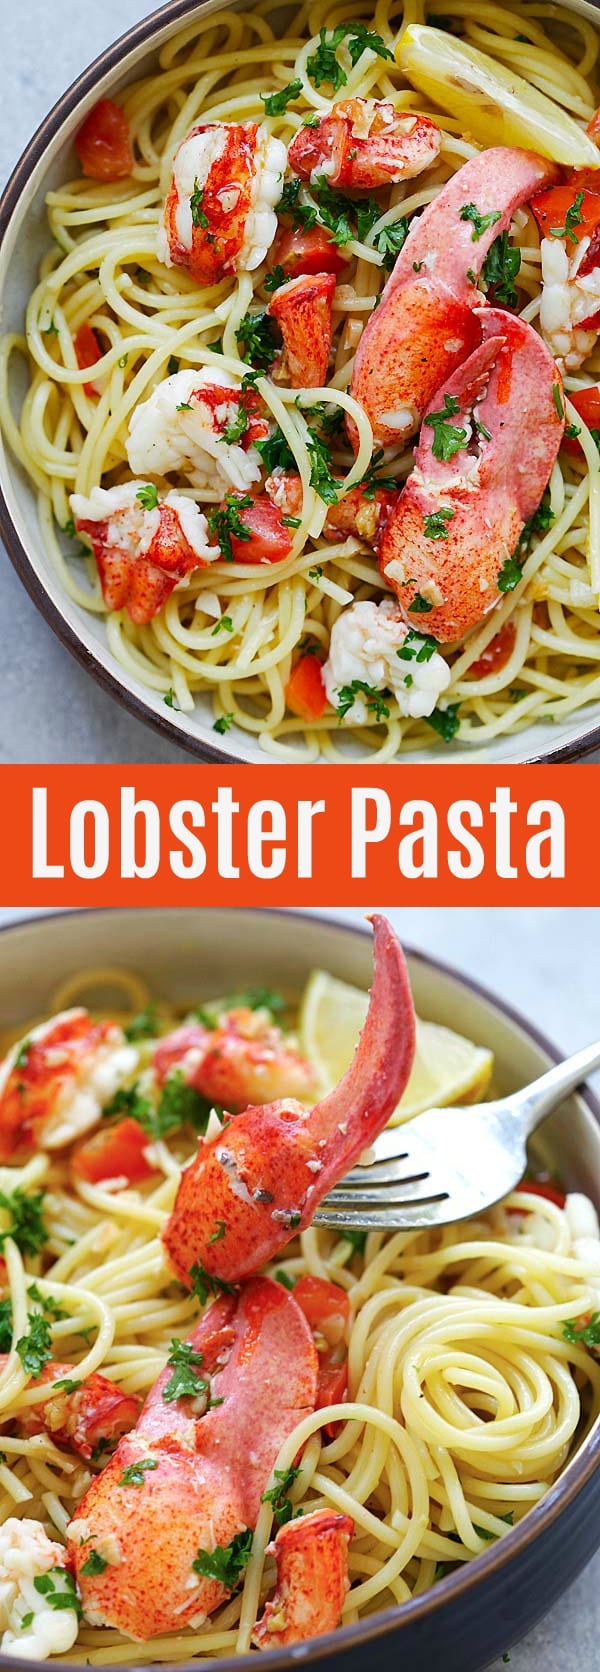 Lobster Pasta - amazing lobster pasta recipe you can make at home! Garlicky, buttery and loaded with lobster, it's better and cheaper than restaurants | rasamalaysia.com